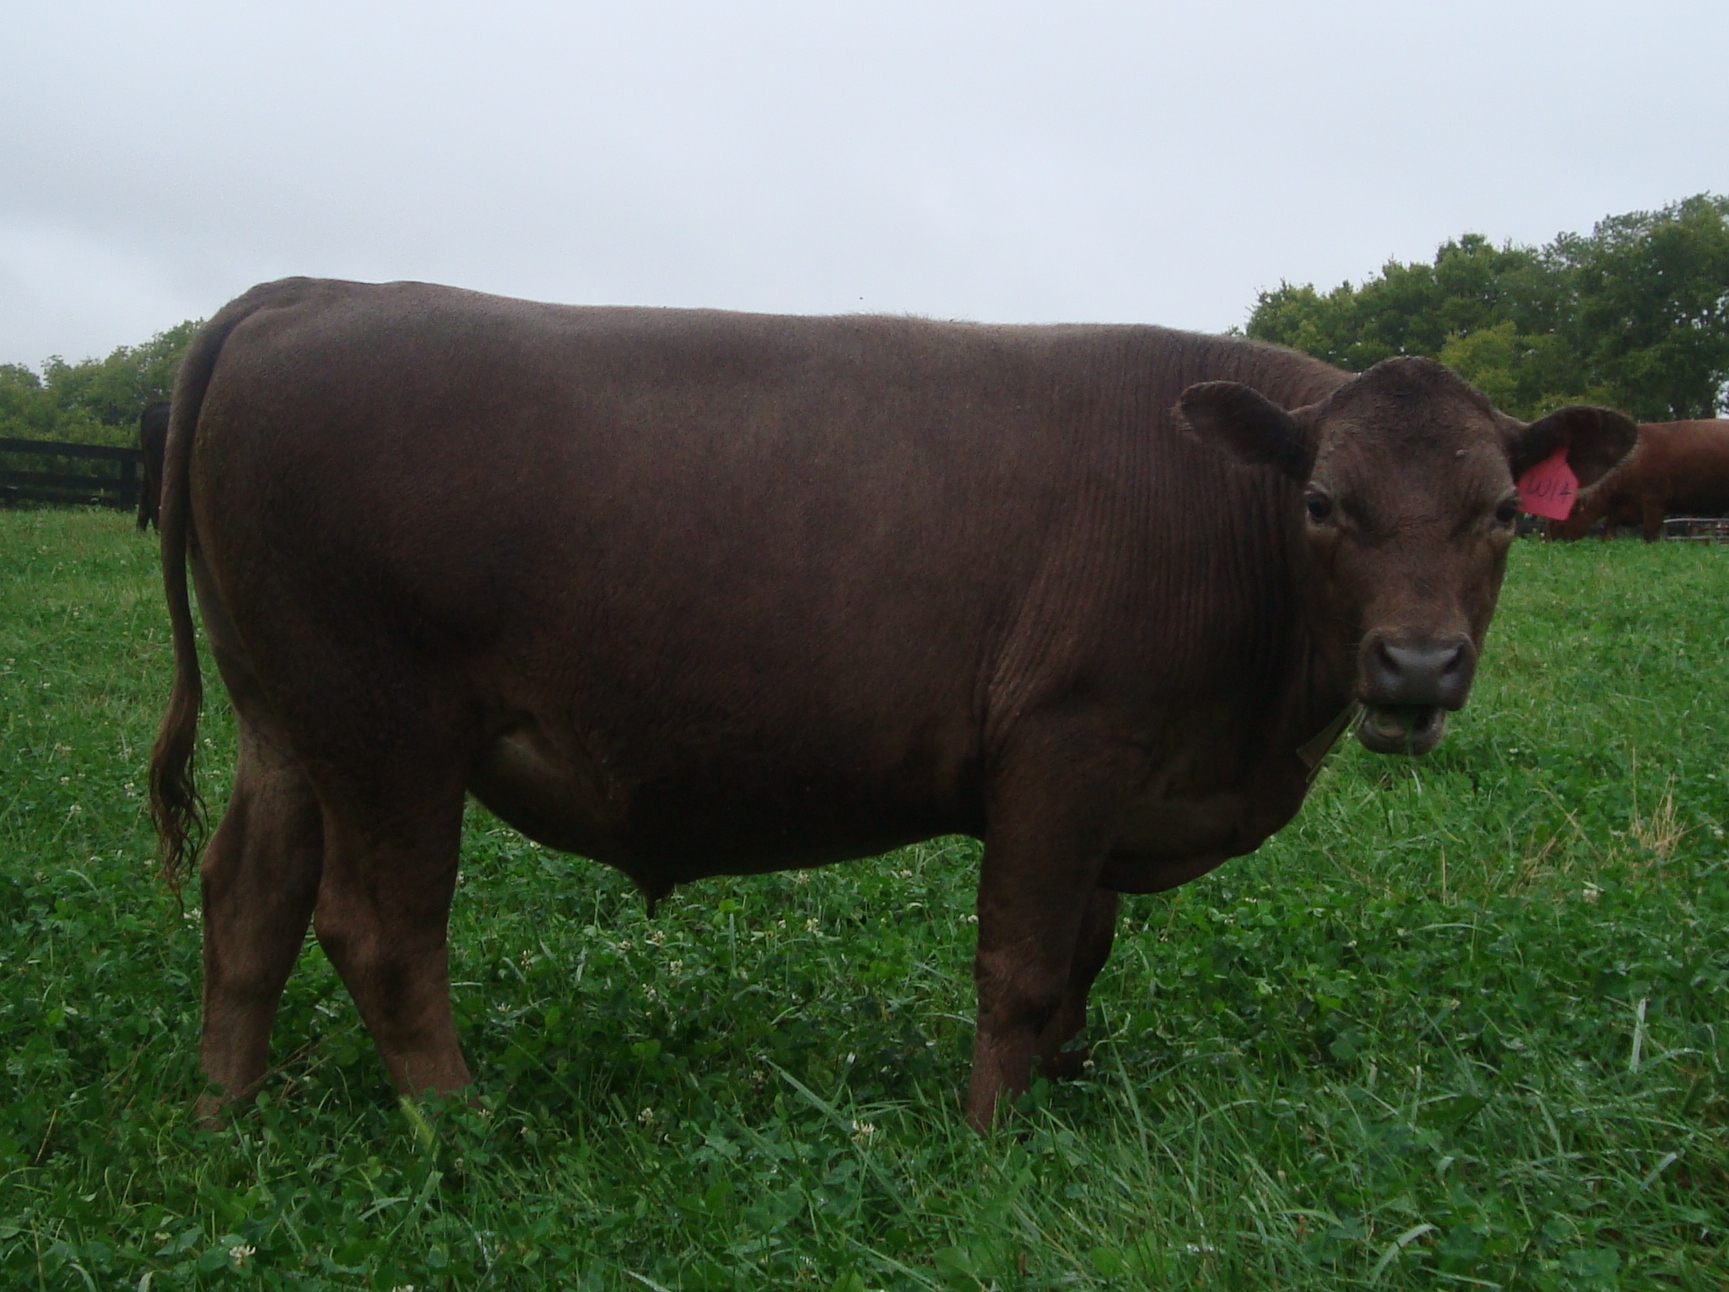 Steers like this helped convince us that "buying a bull on eBay" wasn't such a bad idea after all.